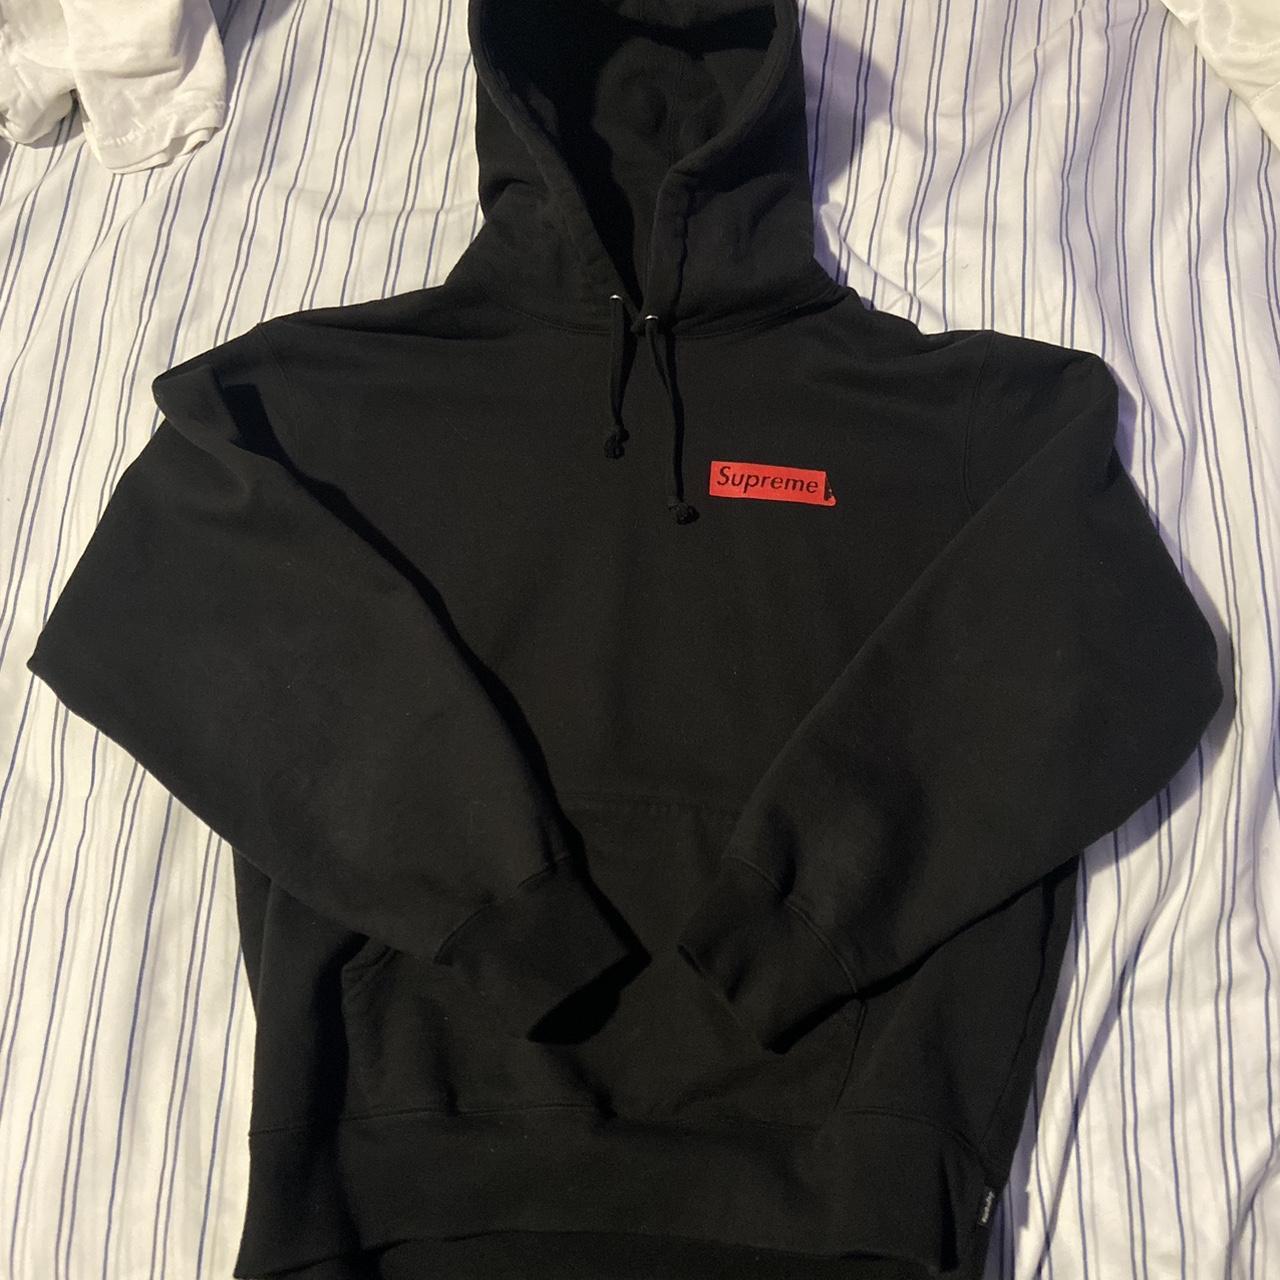 Supreme Instant High Patches Hoodie Size Small... - Depop